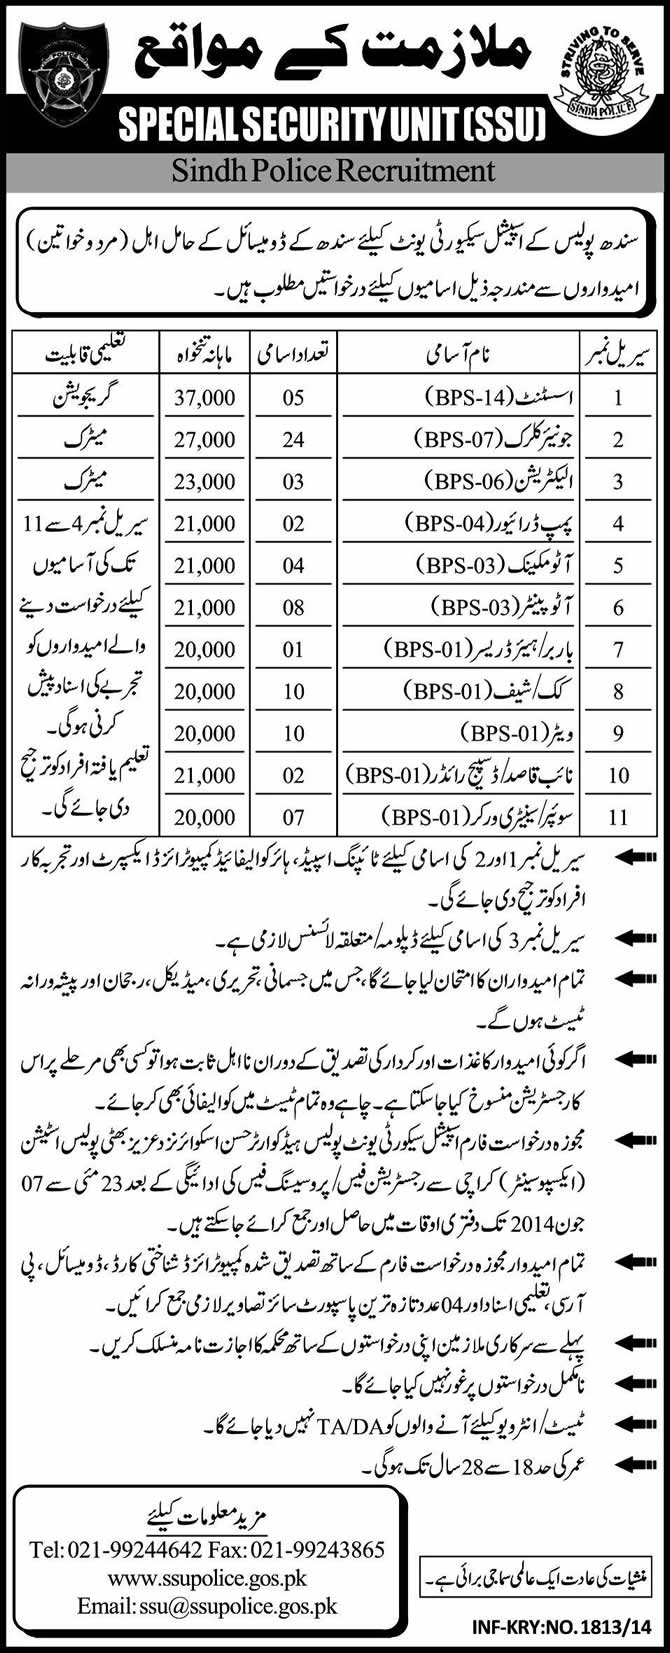 Sindh Police Jobs 2014 May Latest in Special Security Unit - SSU